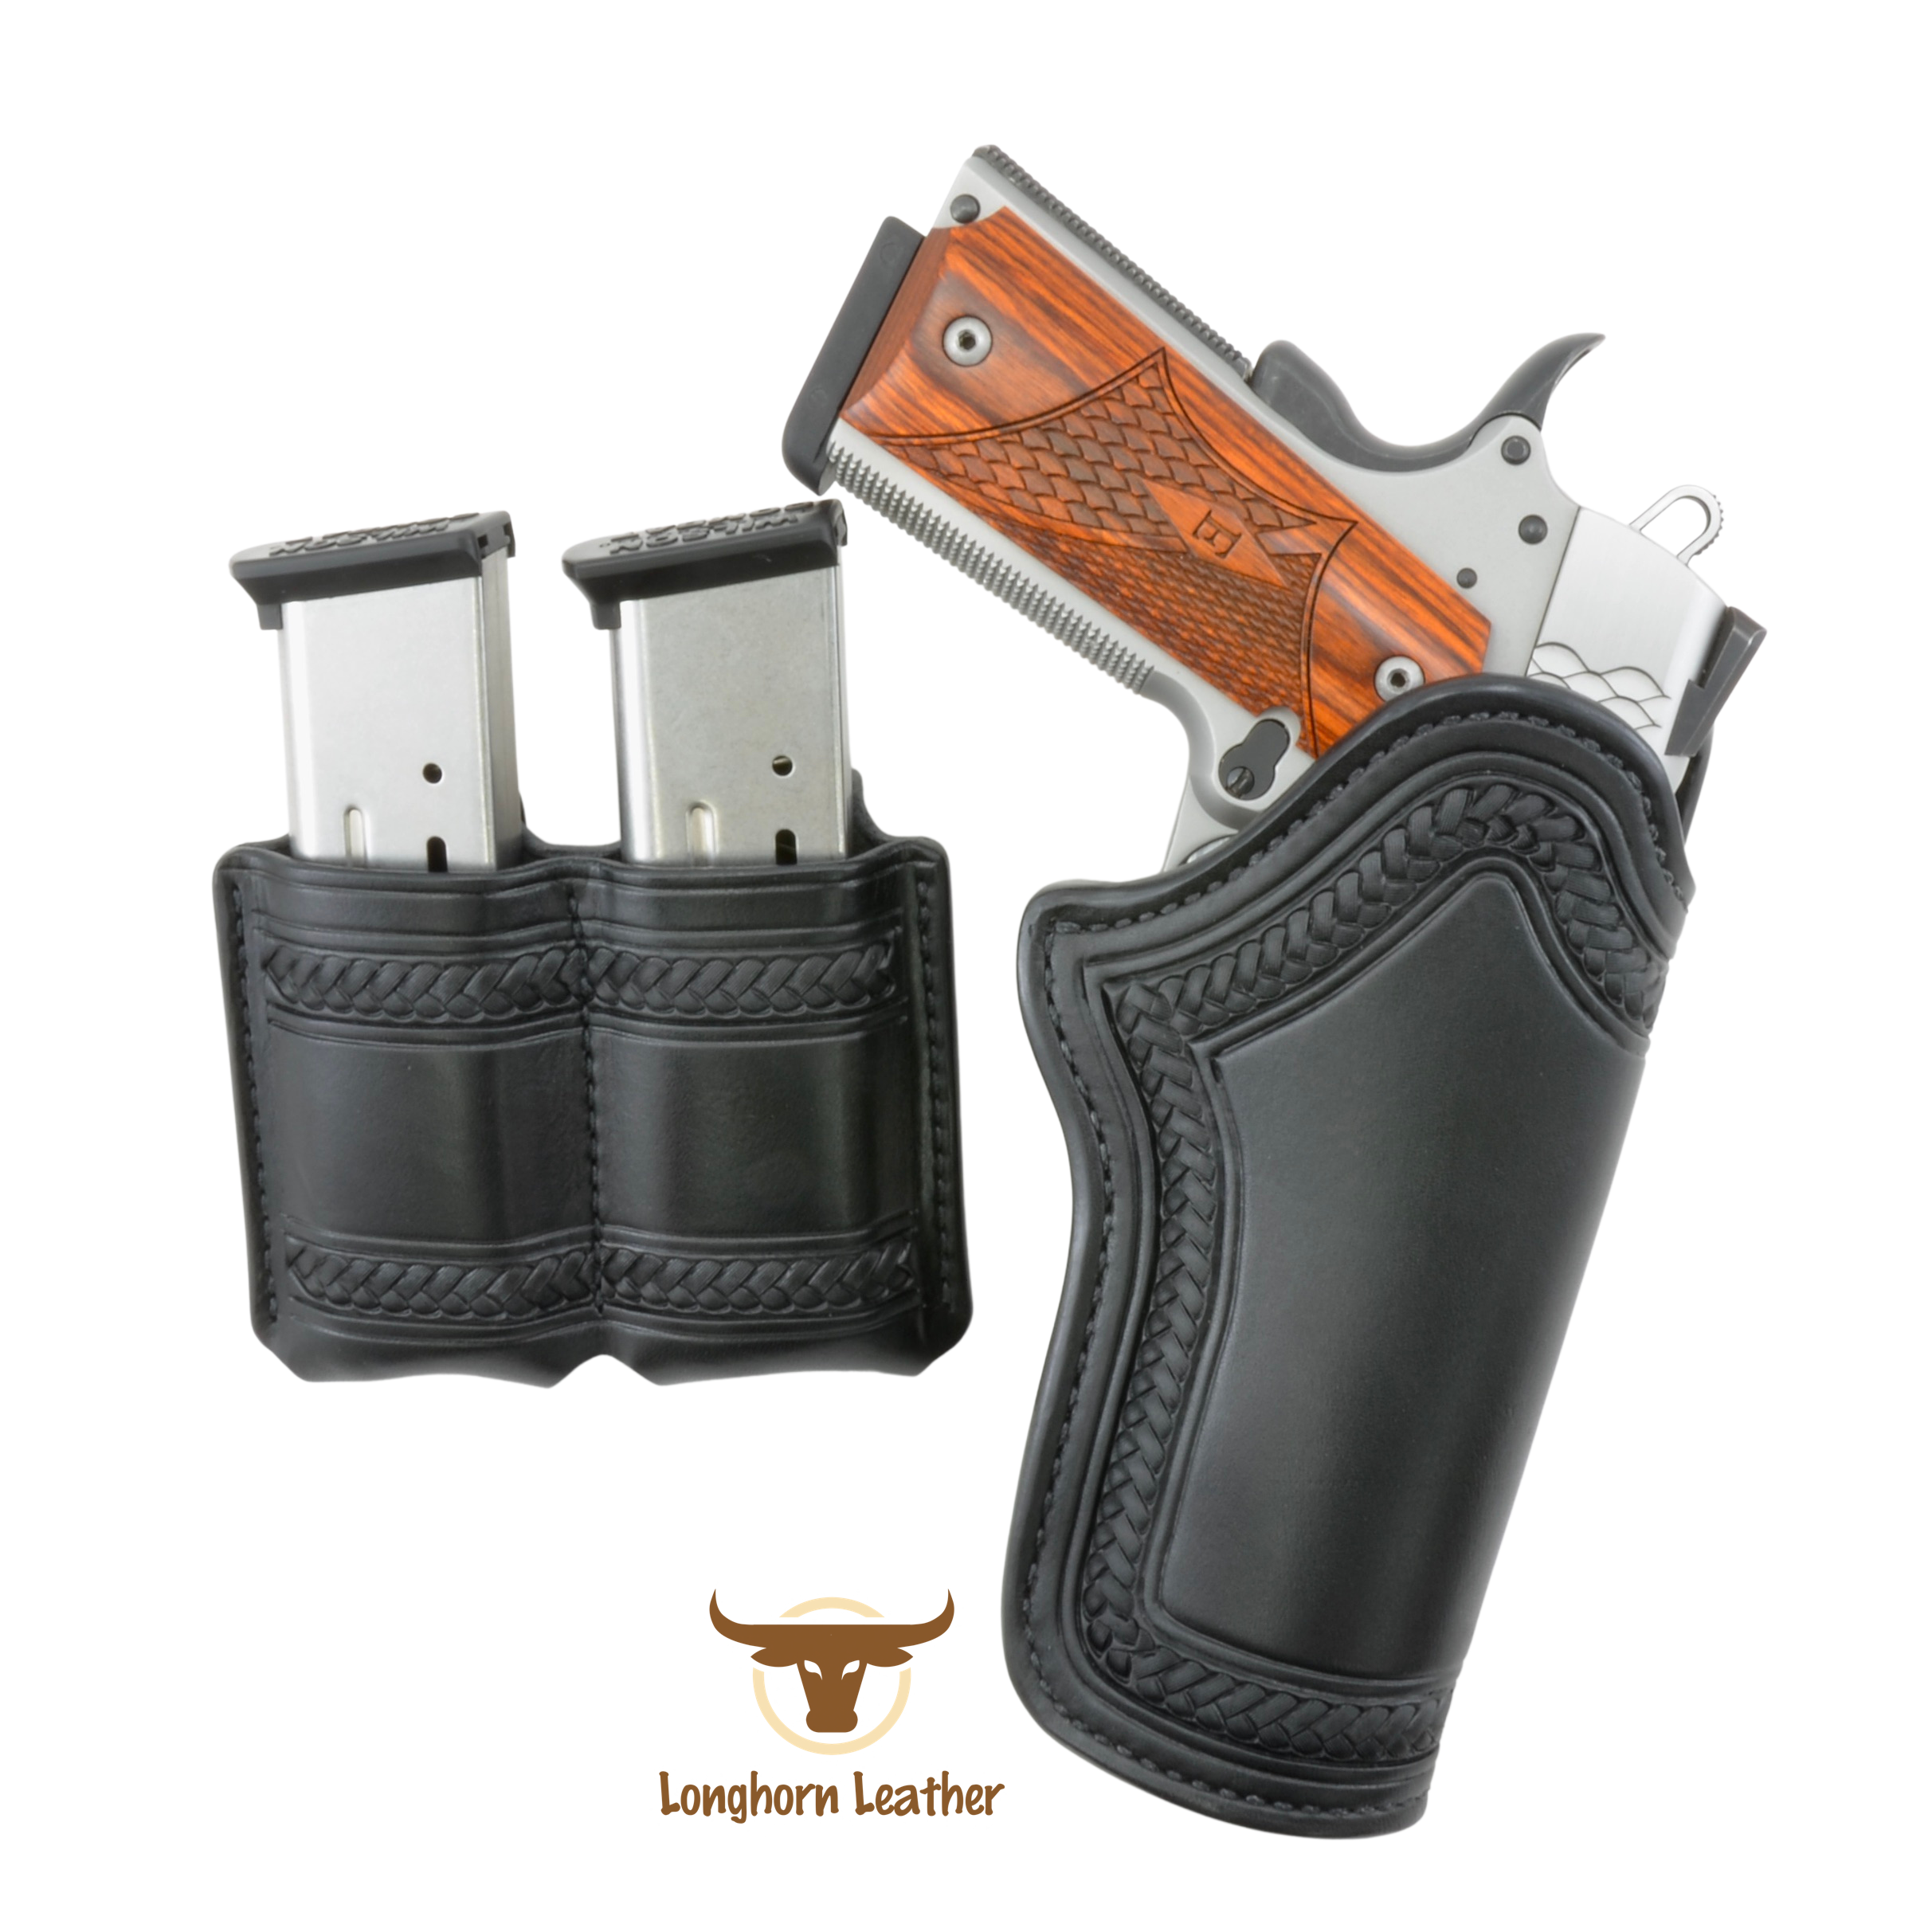 Custom leather 1911 holster and magazine carrier featuring the "Sedona" design. Individually handcrafted at Longhorn Leather AZ